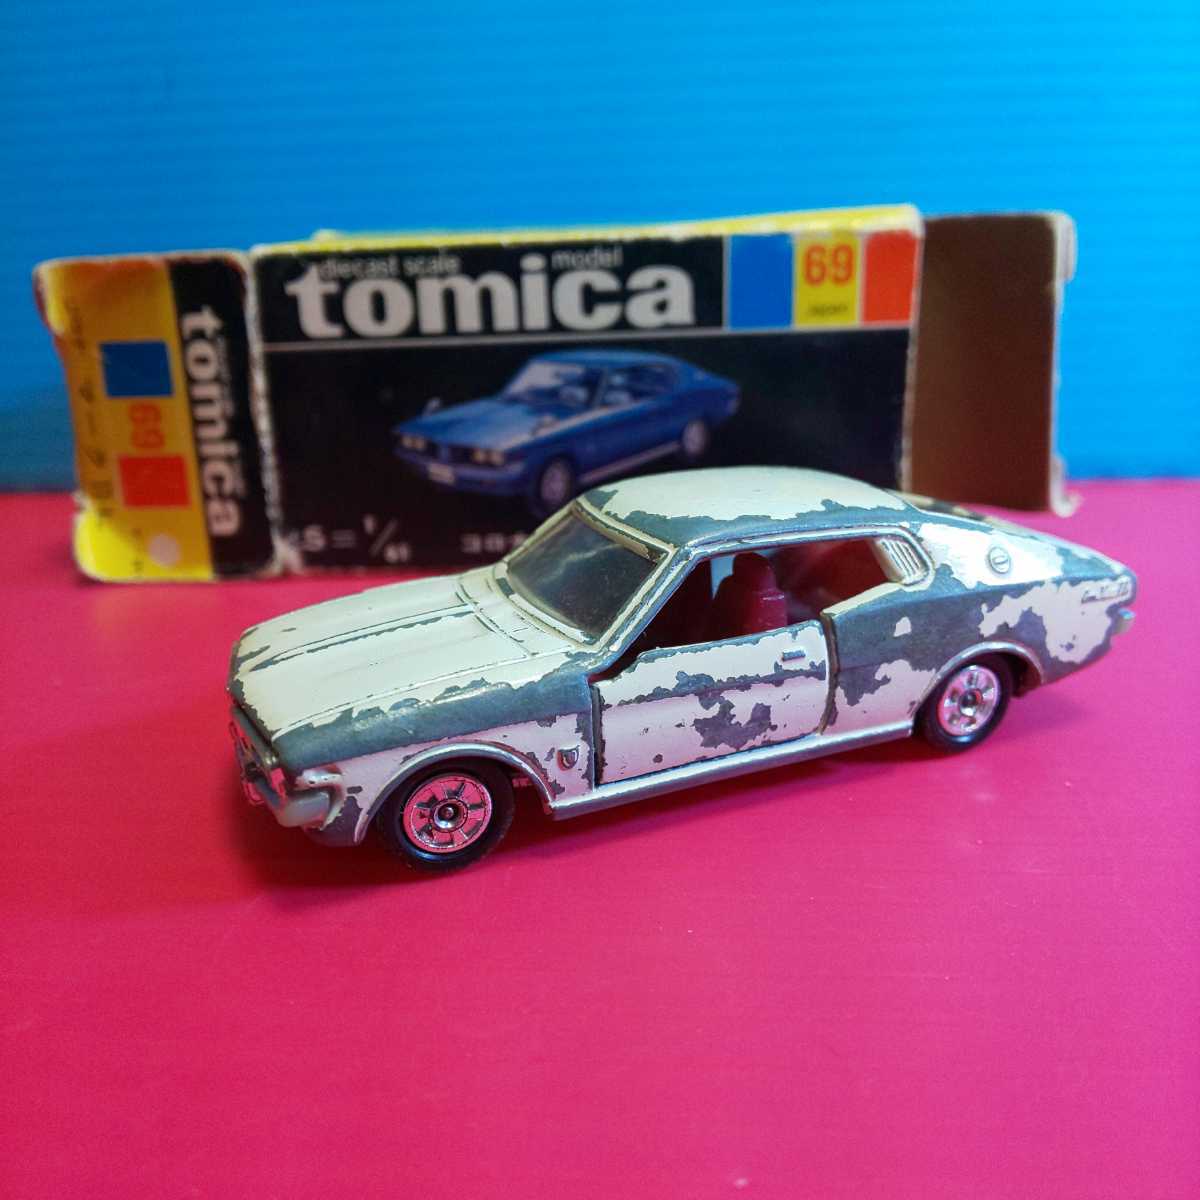 TOMICA トミカ コロナ マークⅡ 1900 赤黒色 1Aホイール 箱付き www 